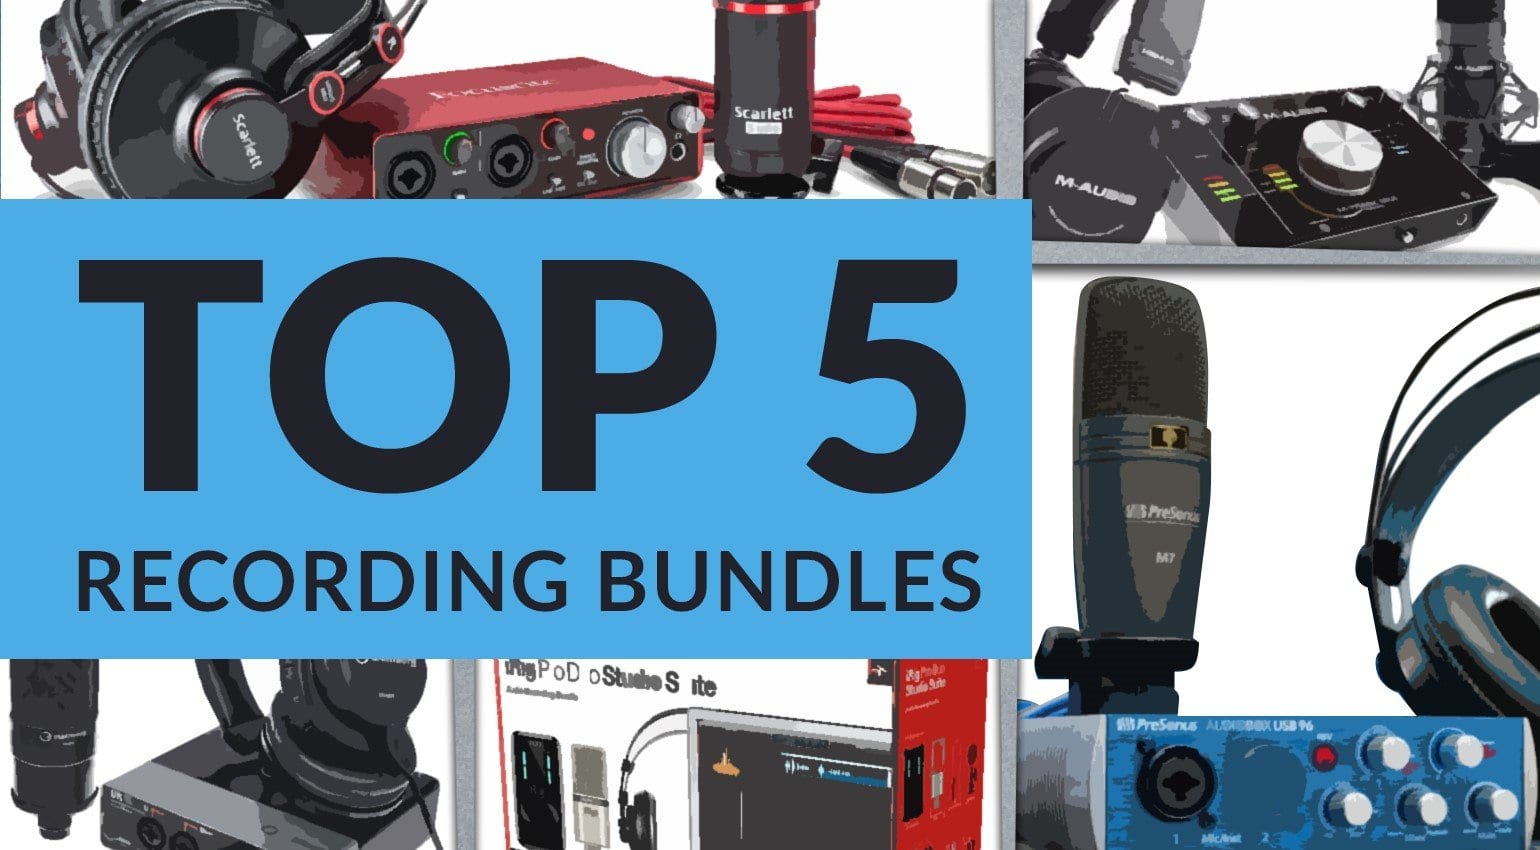 Top 5 starter recording bundles: Which one's right for you? 